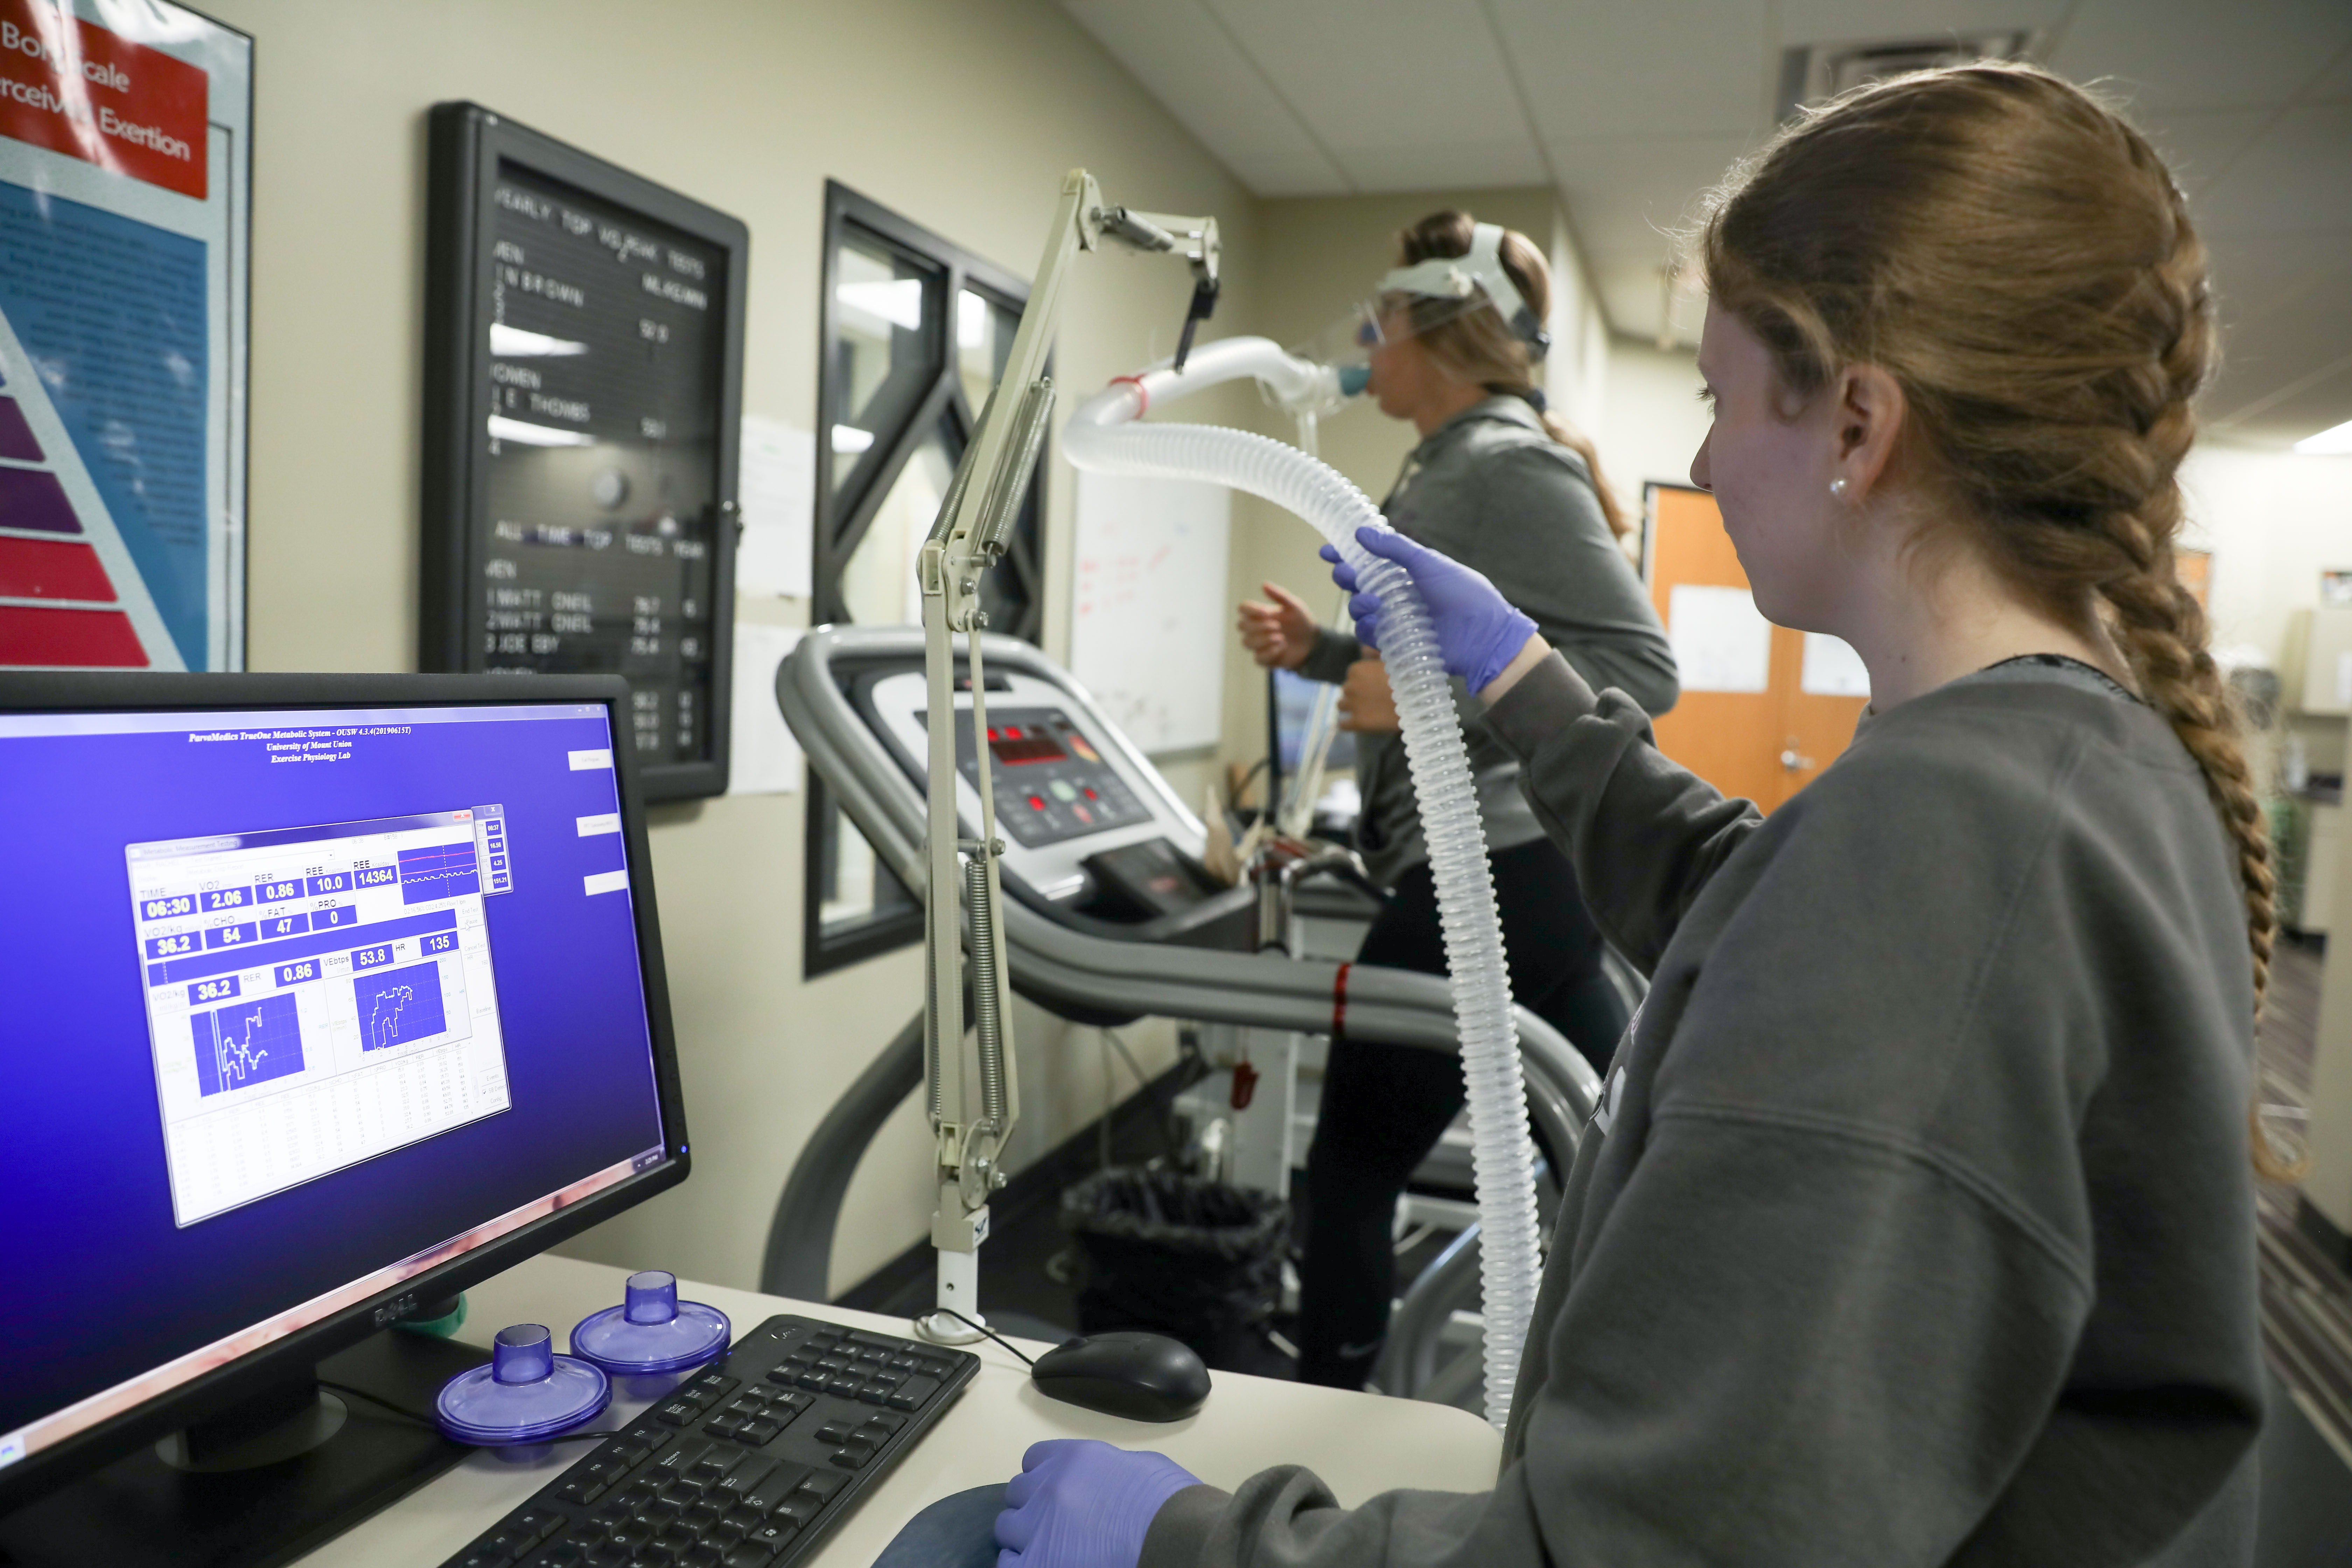 Mount Union exercise science students perform and monitor running test